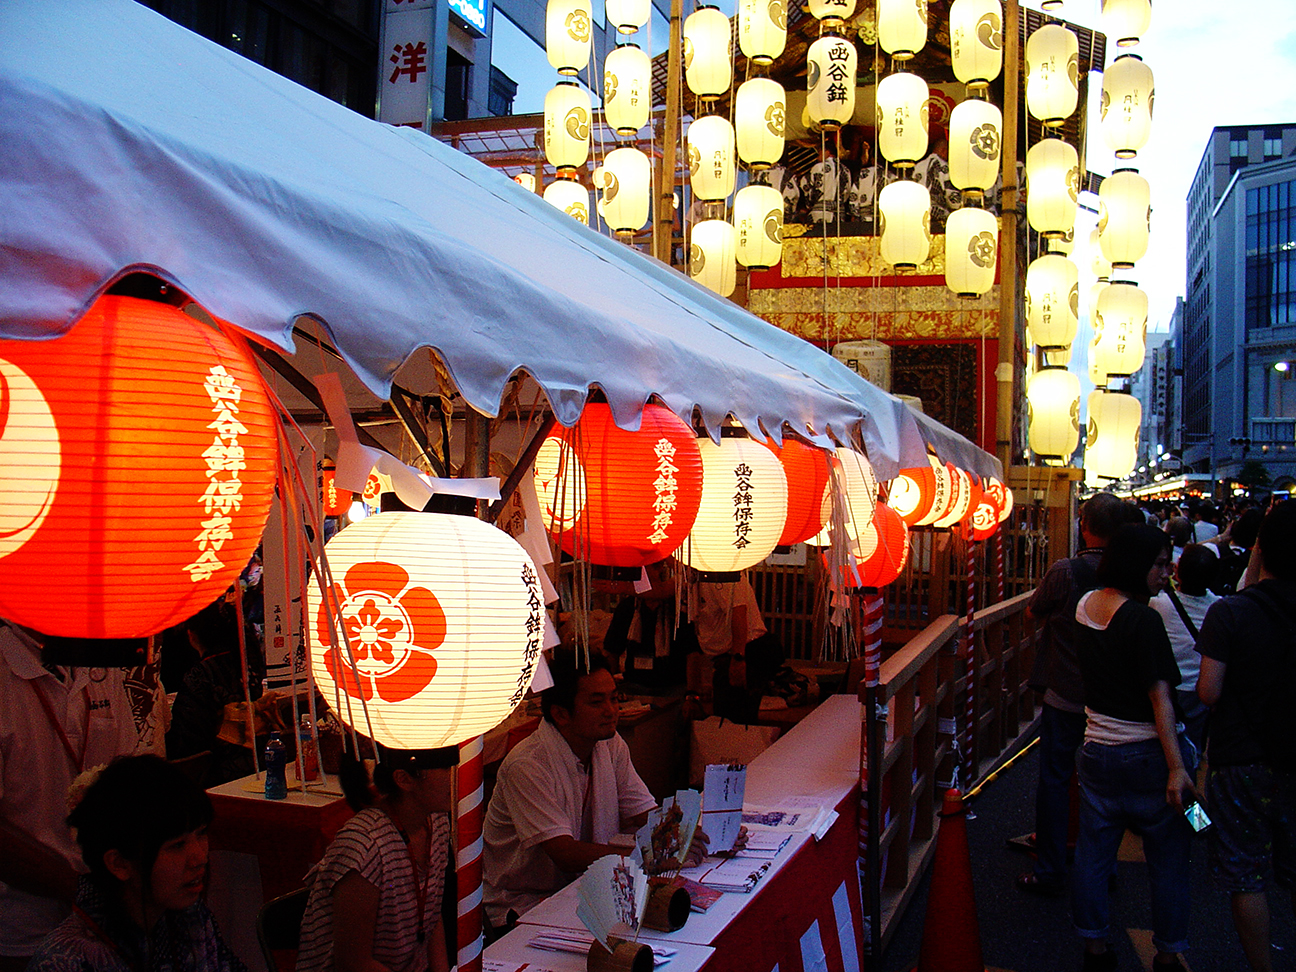 Lanterns at a booth.